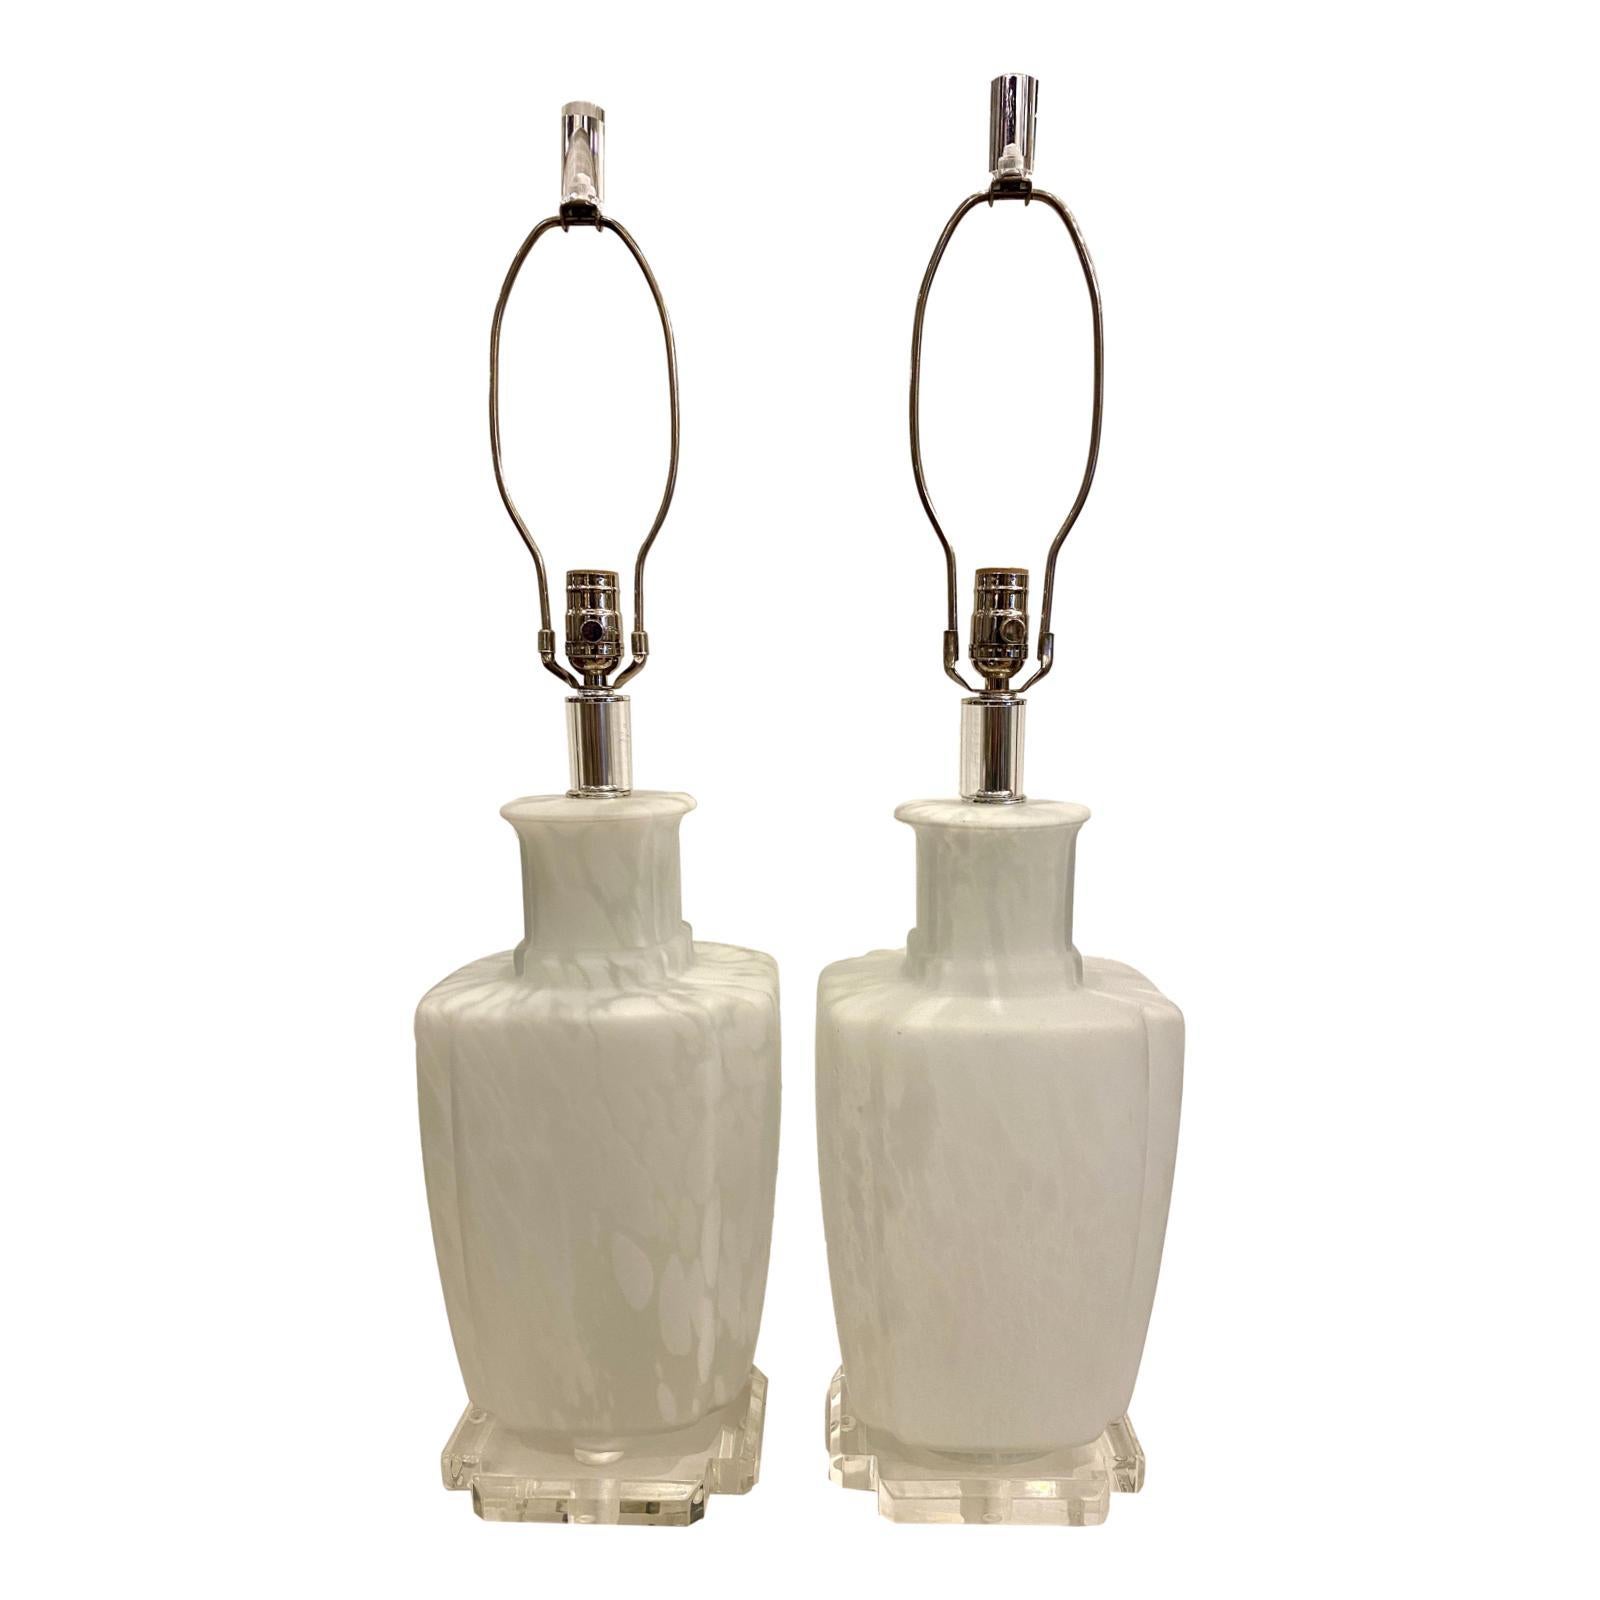 A set of four circa 1960s Italian white speckled glass table lamps with Lucite bases. Sold per pair.

Measurements:
Height of body 18.5?
Height to shade rest 31